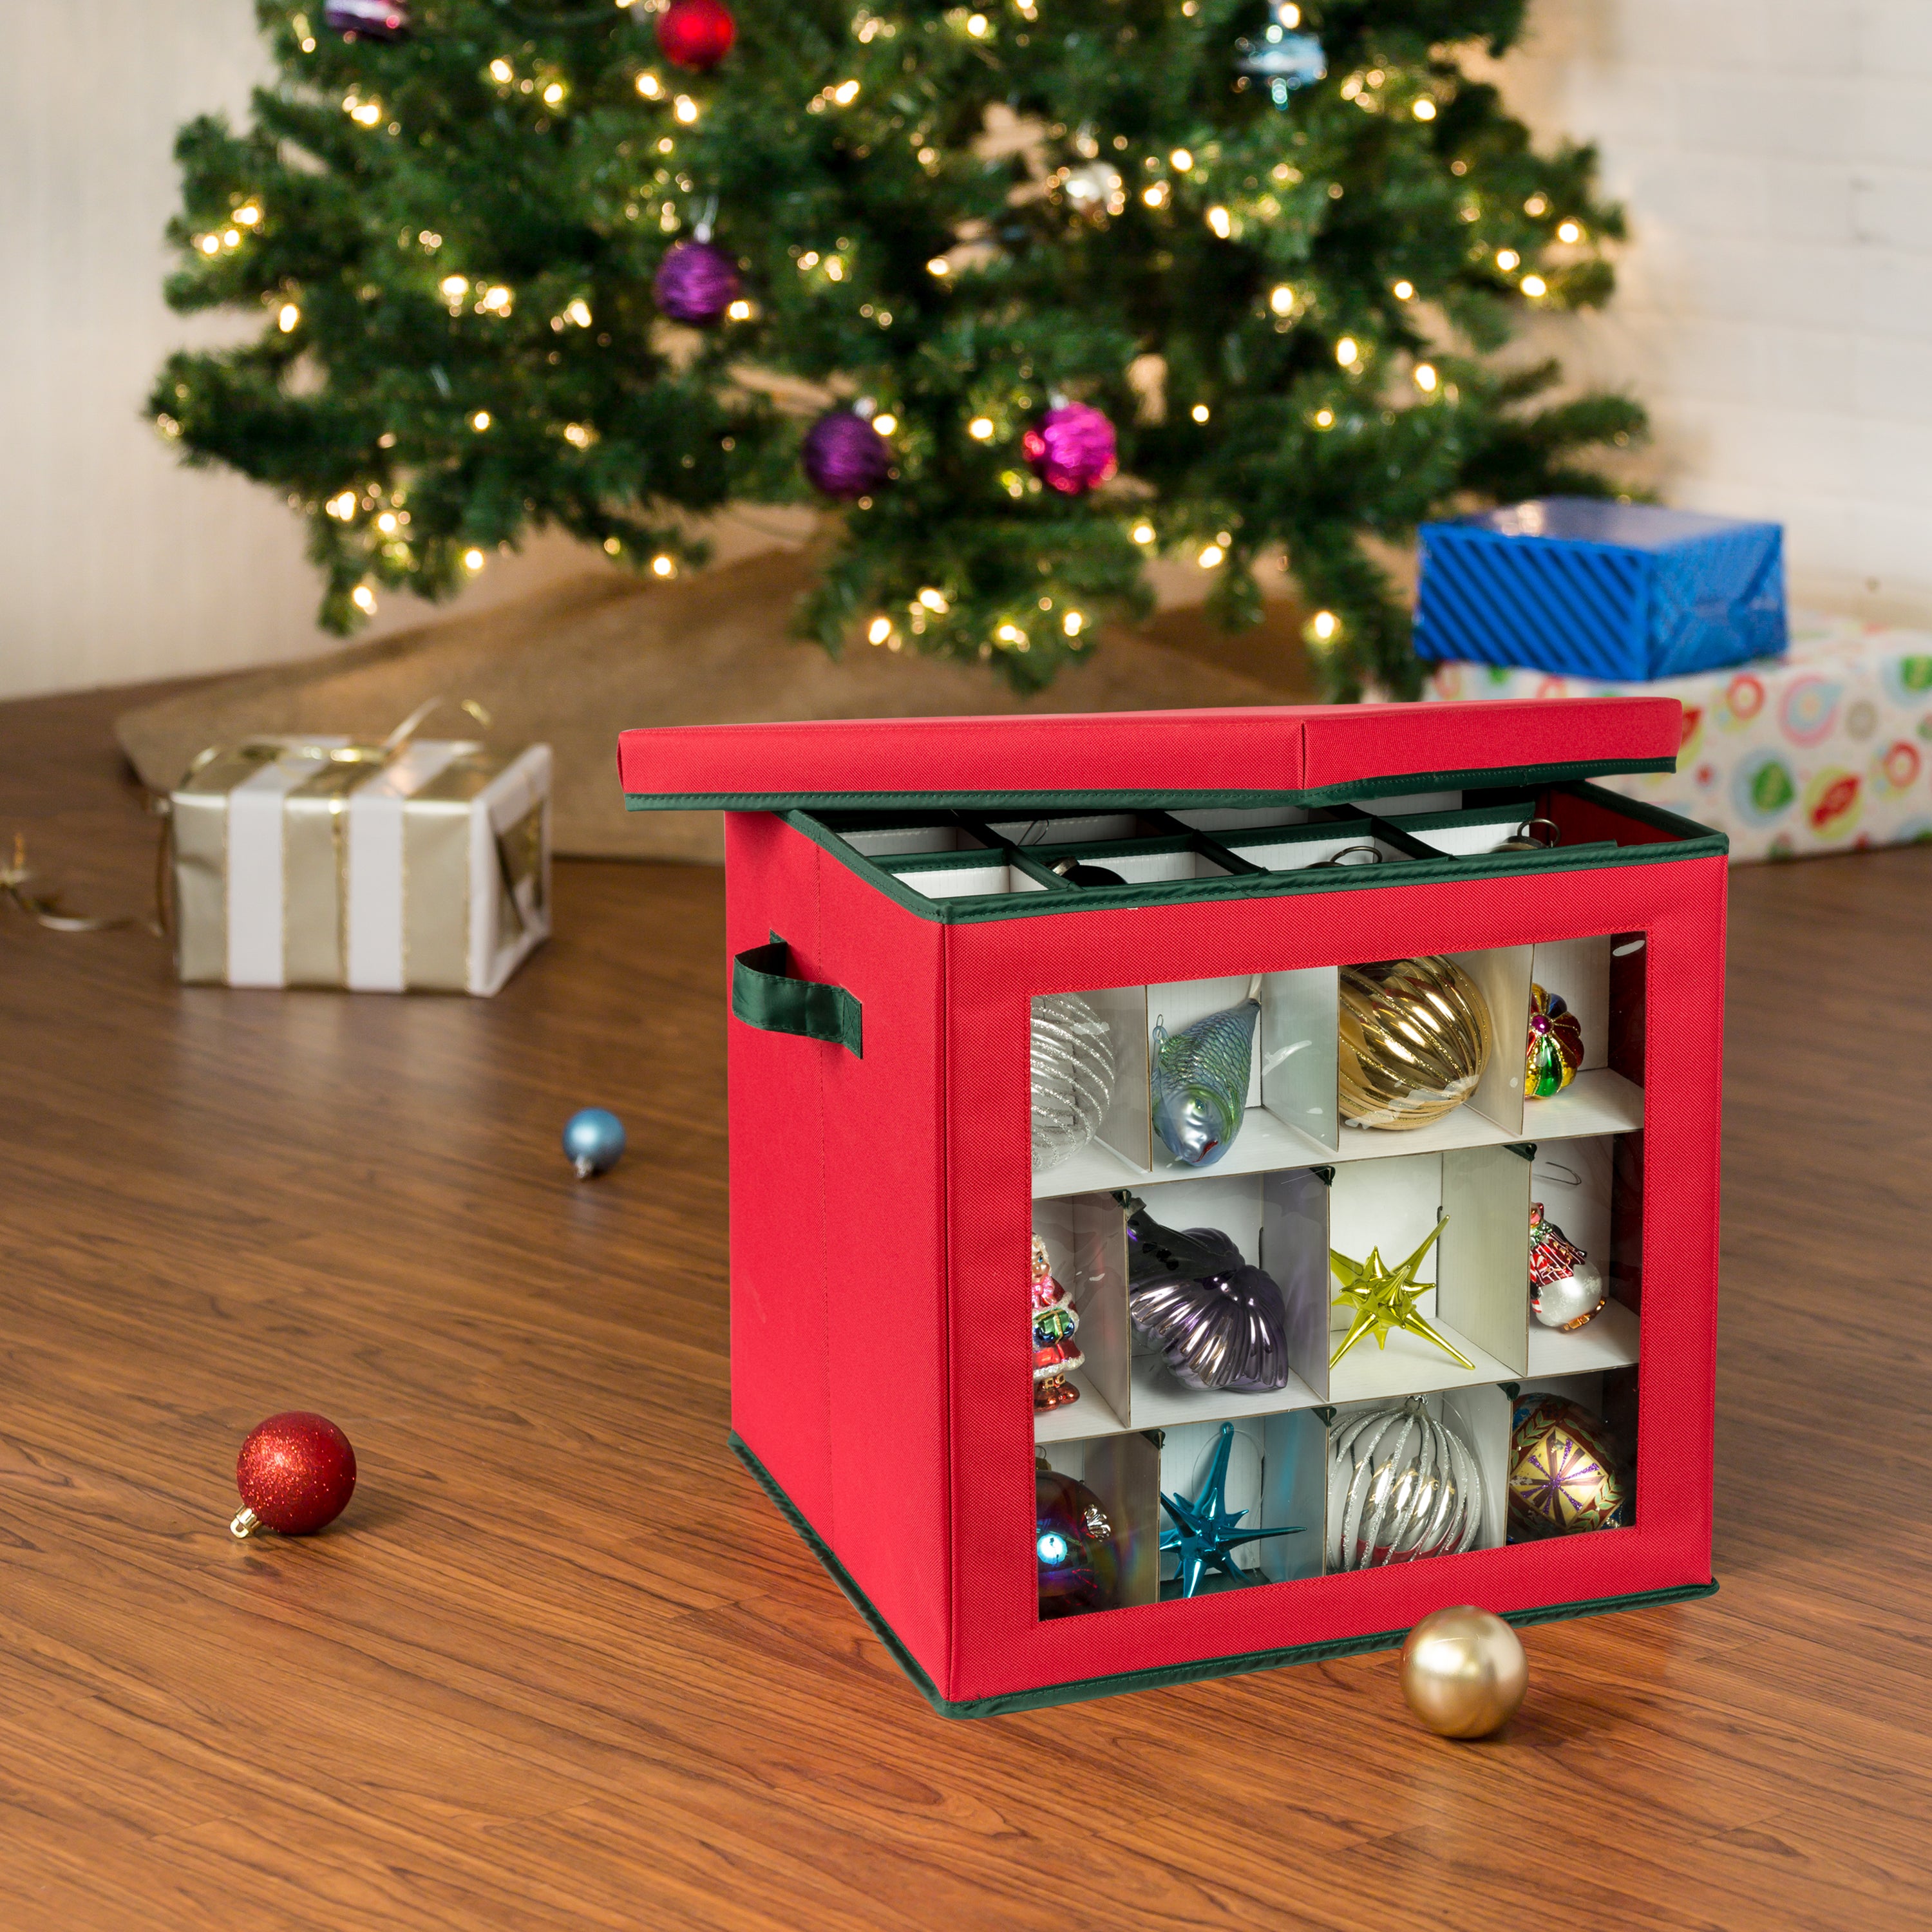 These 7 Holiday Ornament Organizers Have Several Layers of Storage